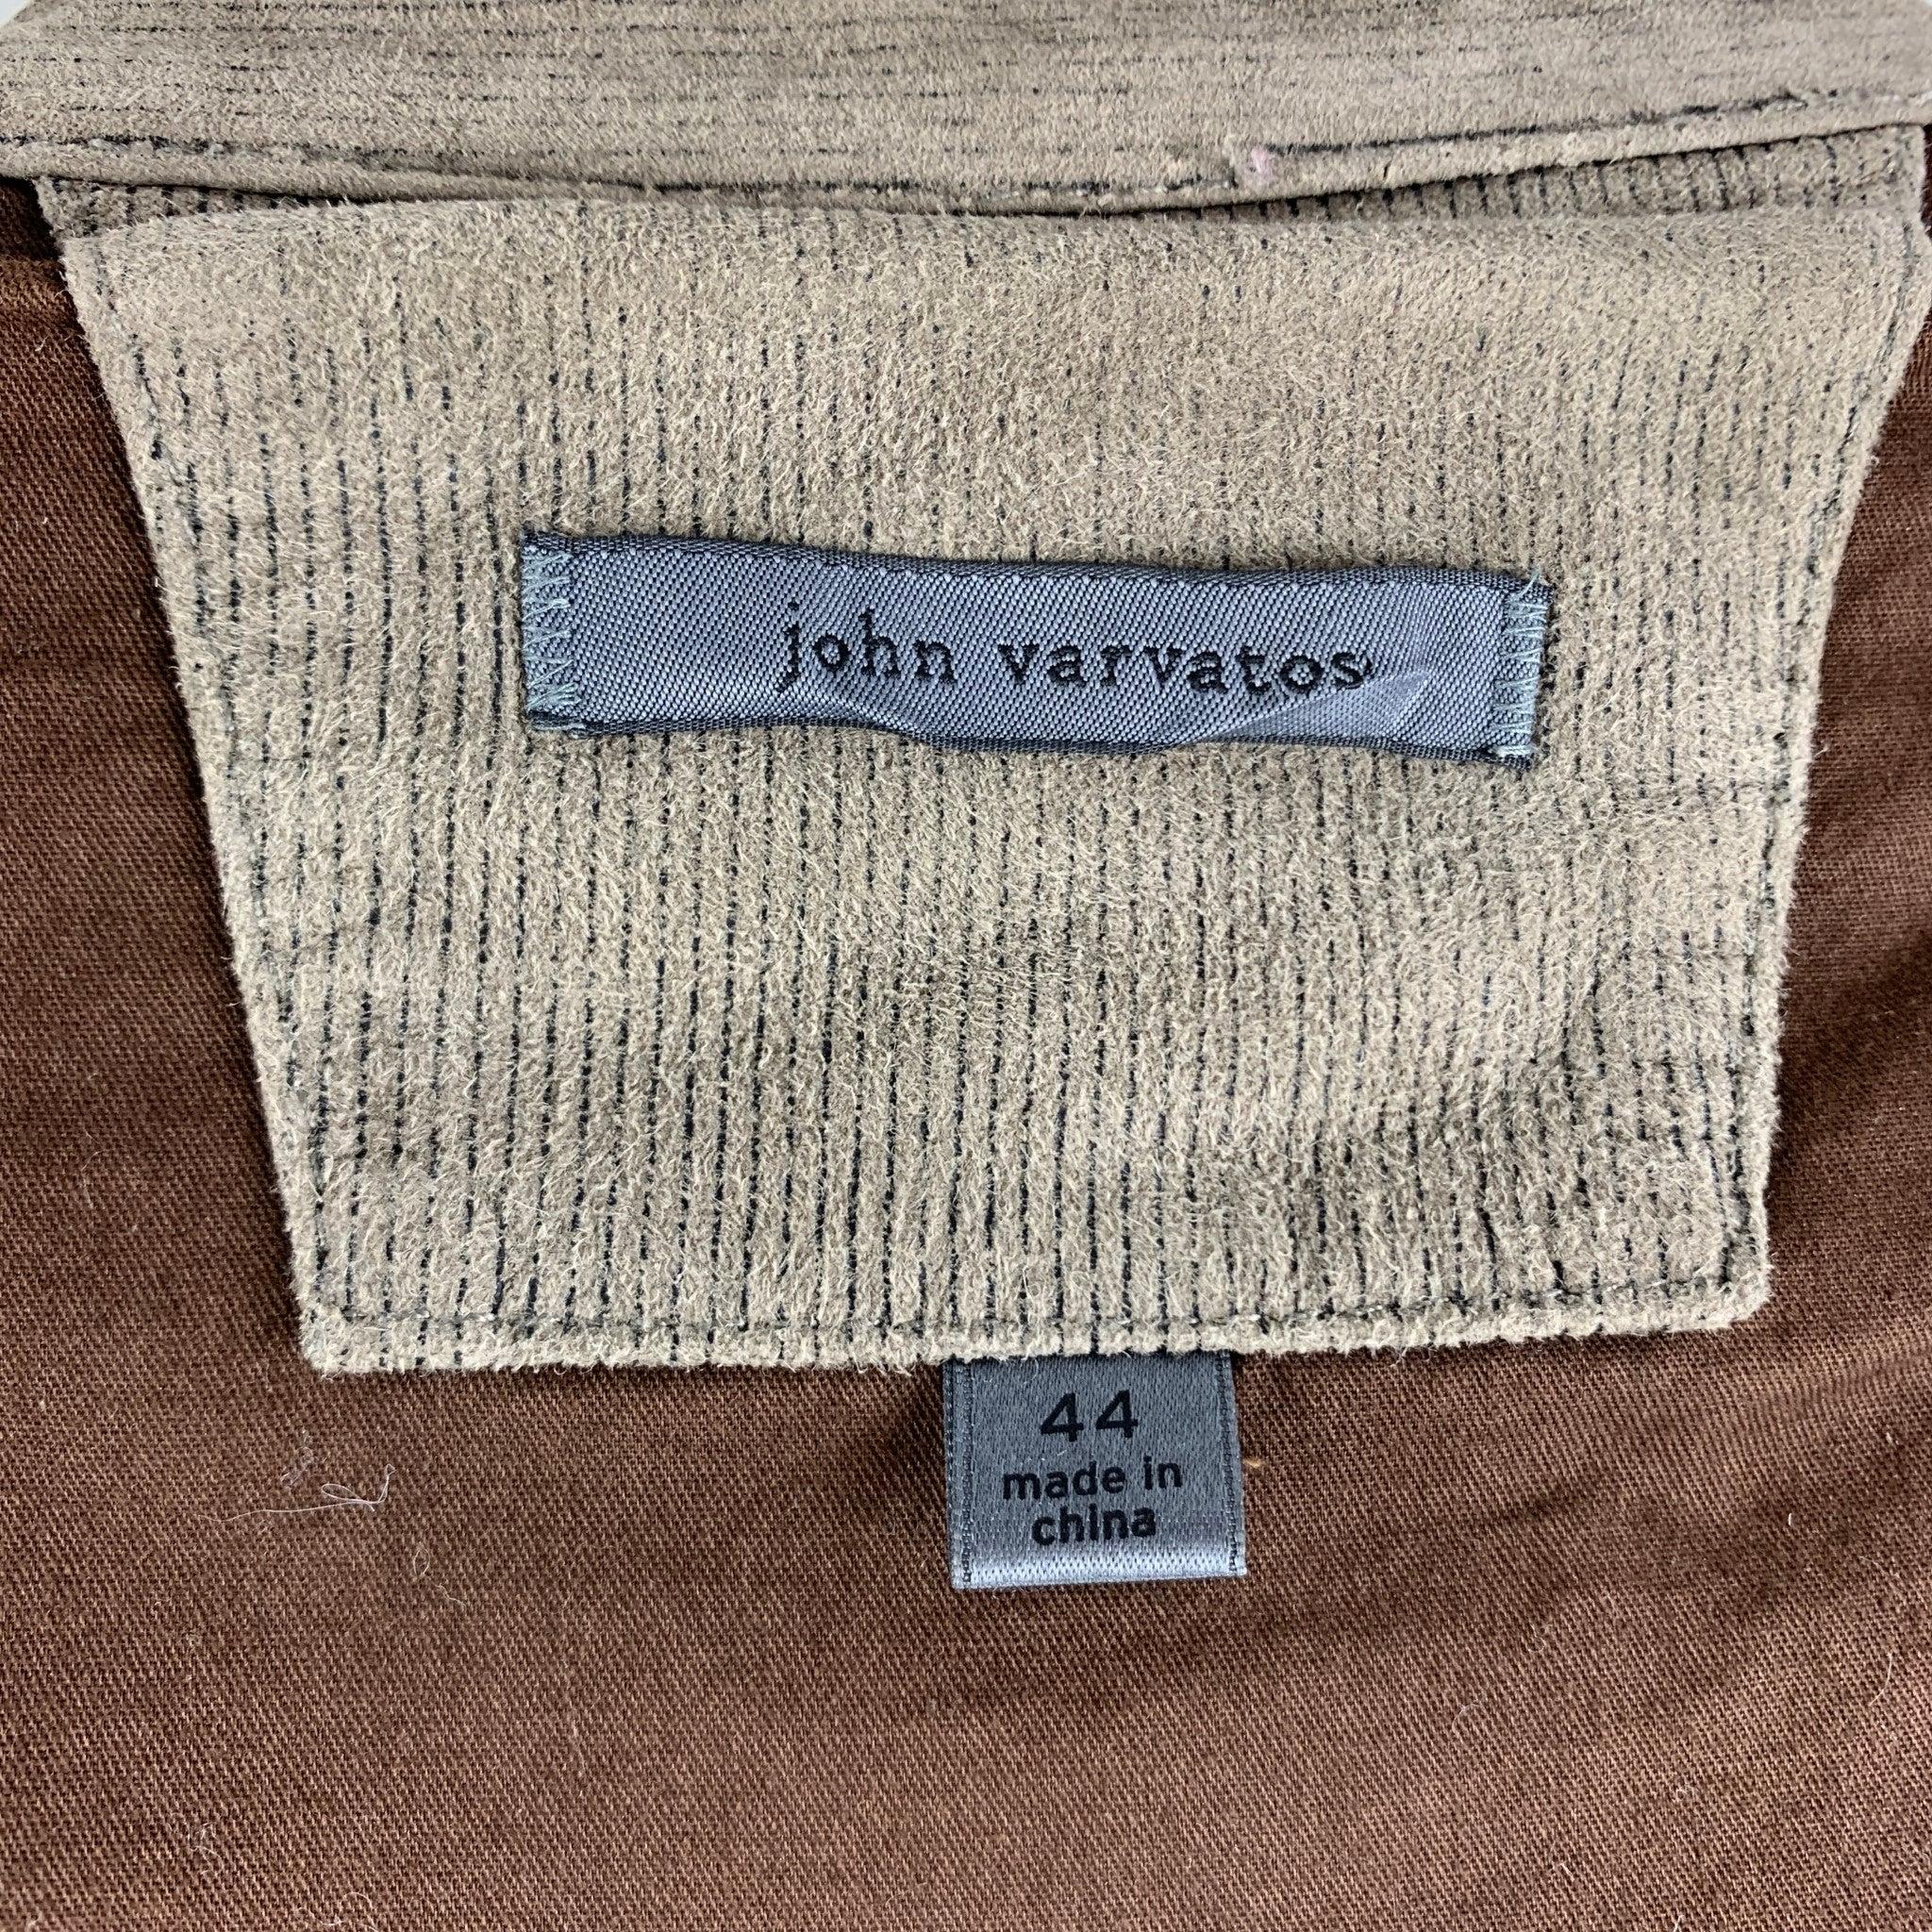 JOHN VARVATOS Chest Size S Size S Green Olive Pinstripe Suede Zip Up Jacket For Sale 1